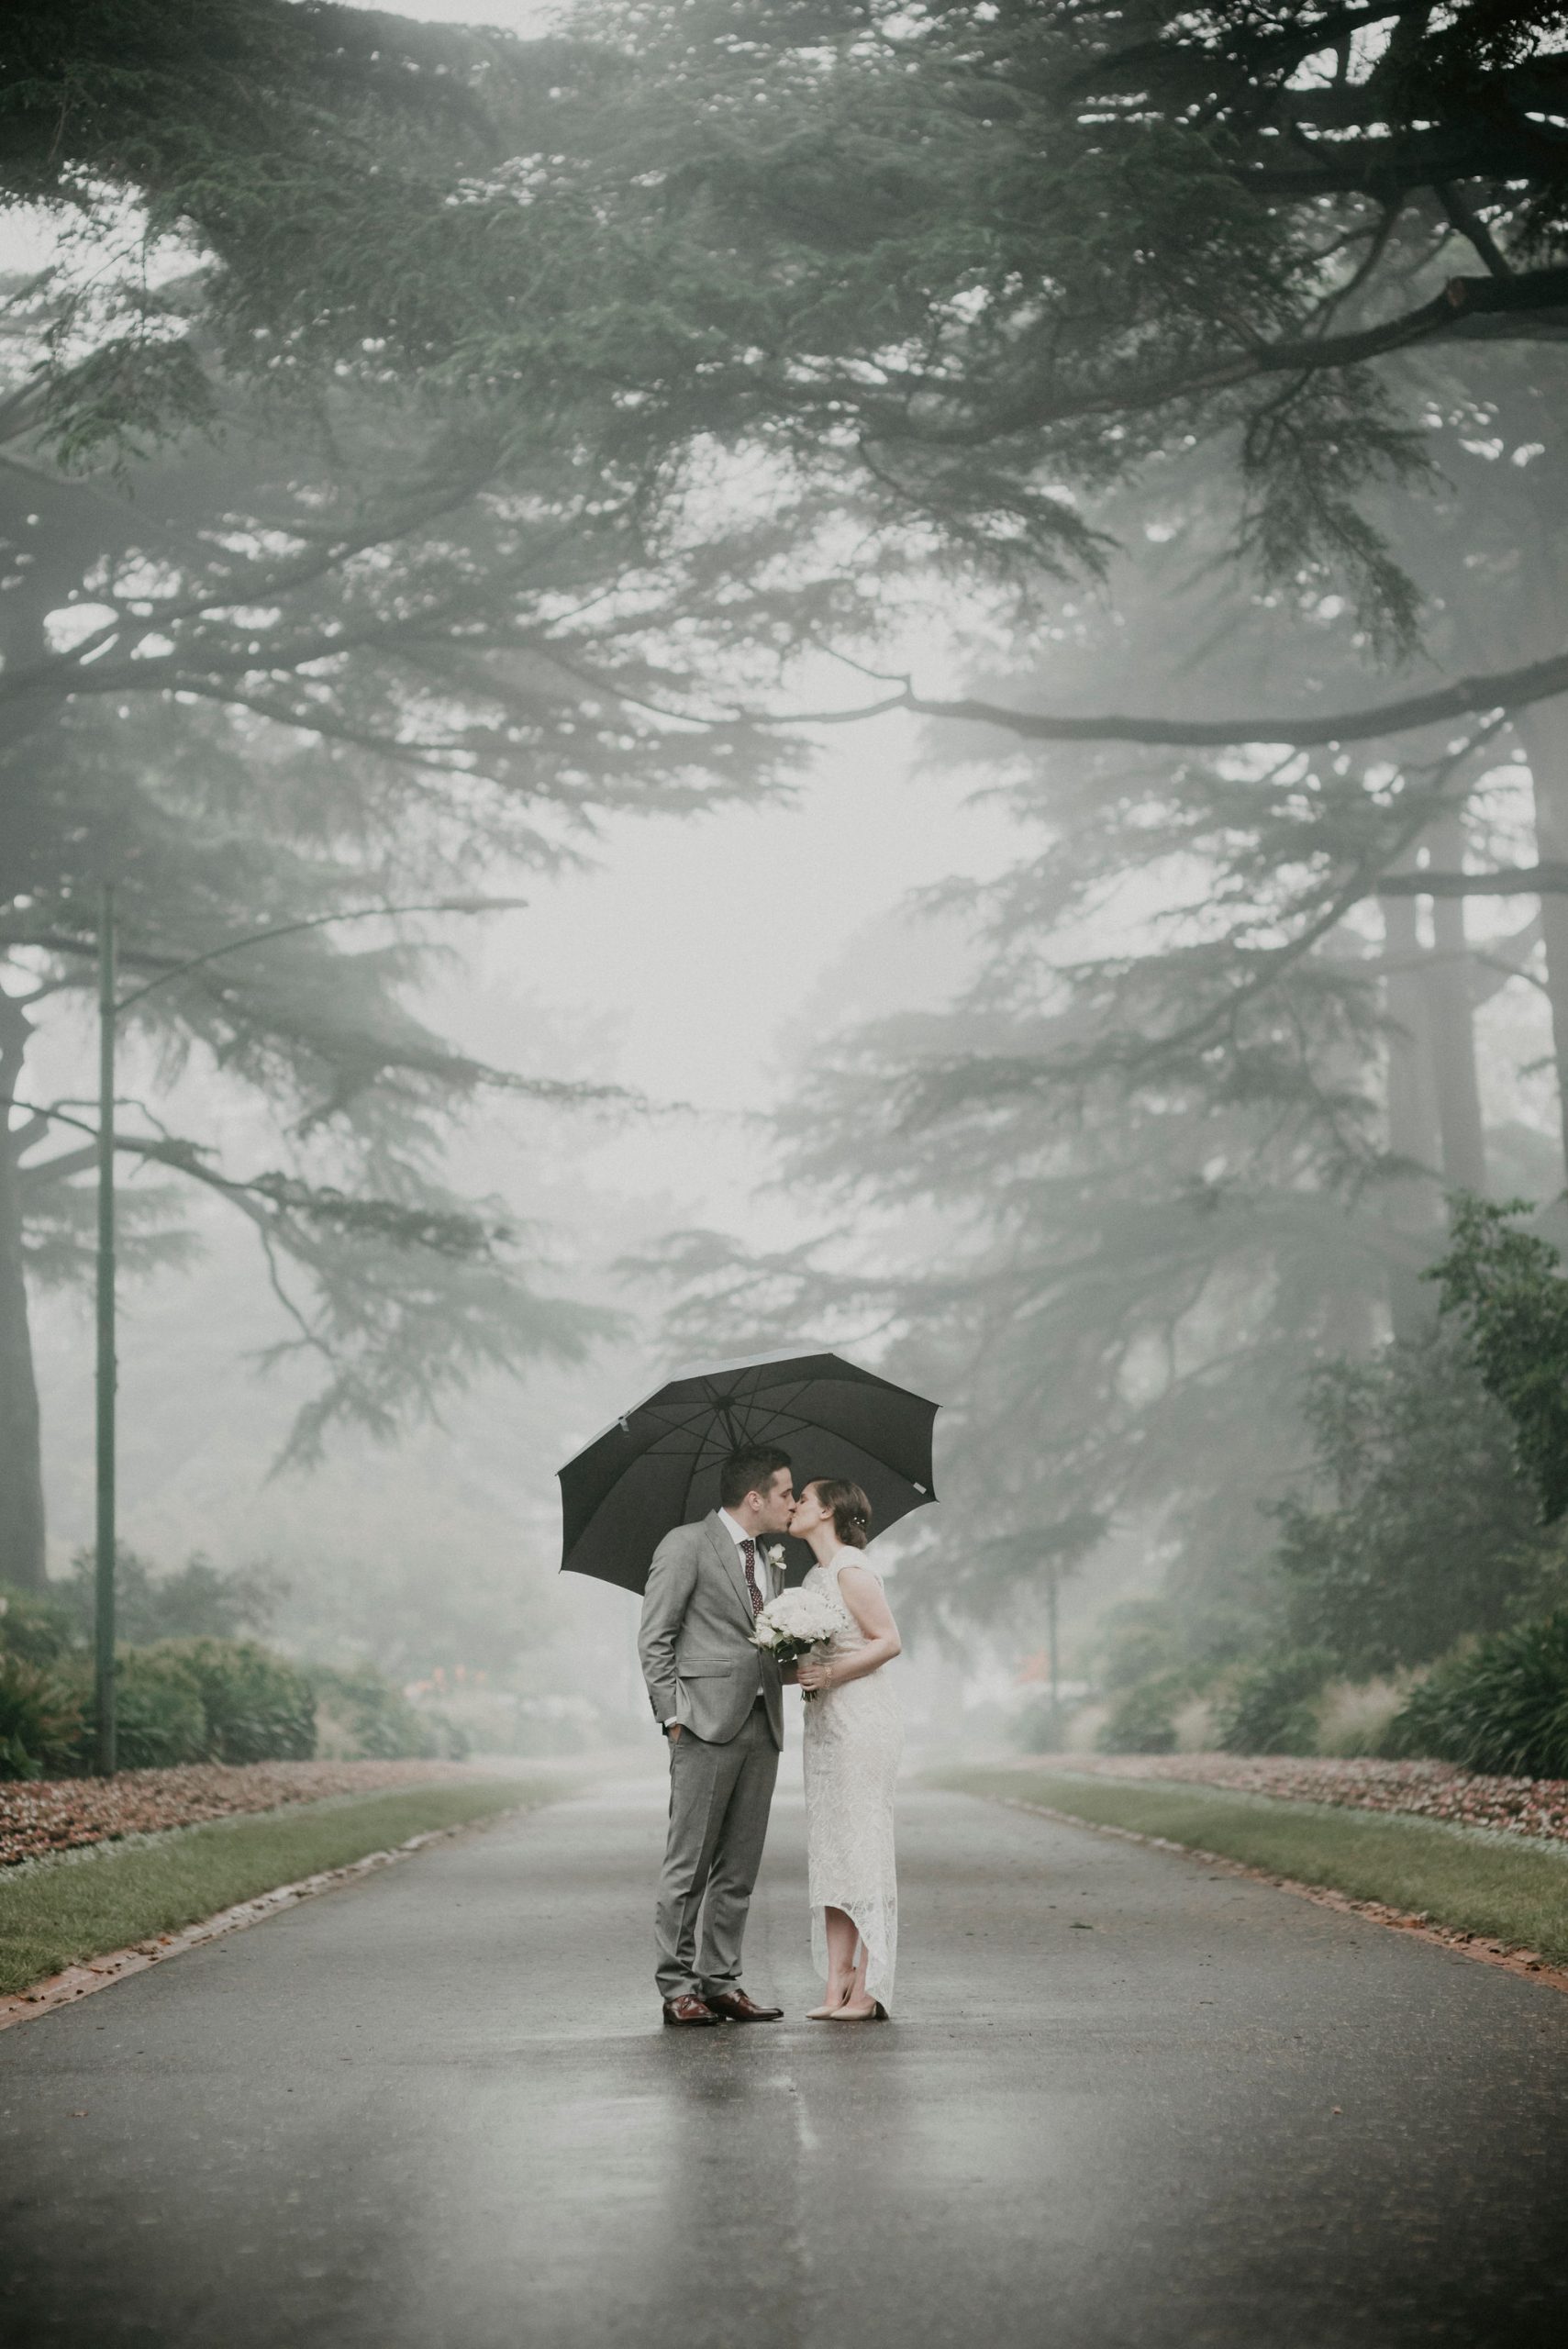 Bride and groom kiss in the middle of the pathway in the rain and fog holding an umbrella Let's Elope Melbourne Portfolio Celebrant Photographer Elopement Package Victoria Sarah Matler Photography intimate wedding Fitzroy Gardens Fog Moody East Melbourne